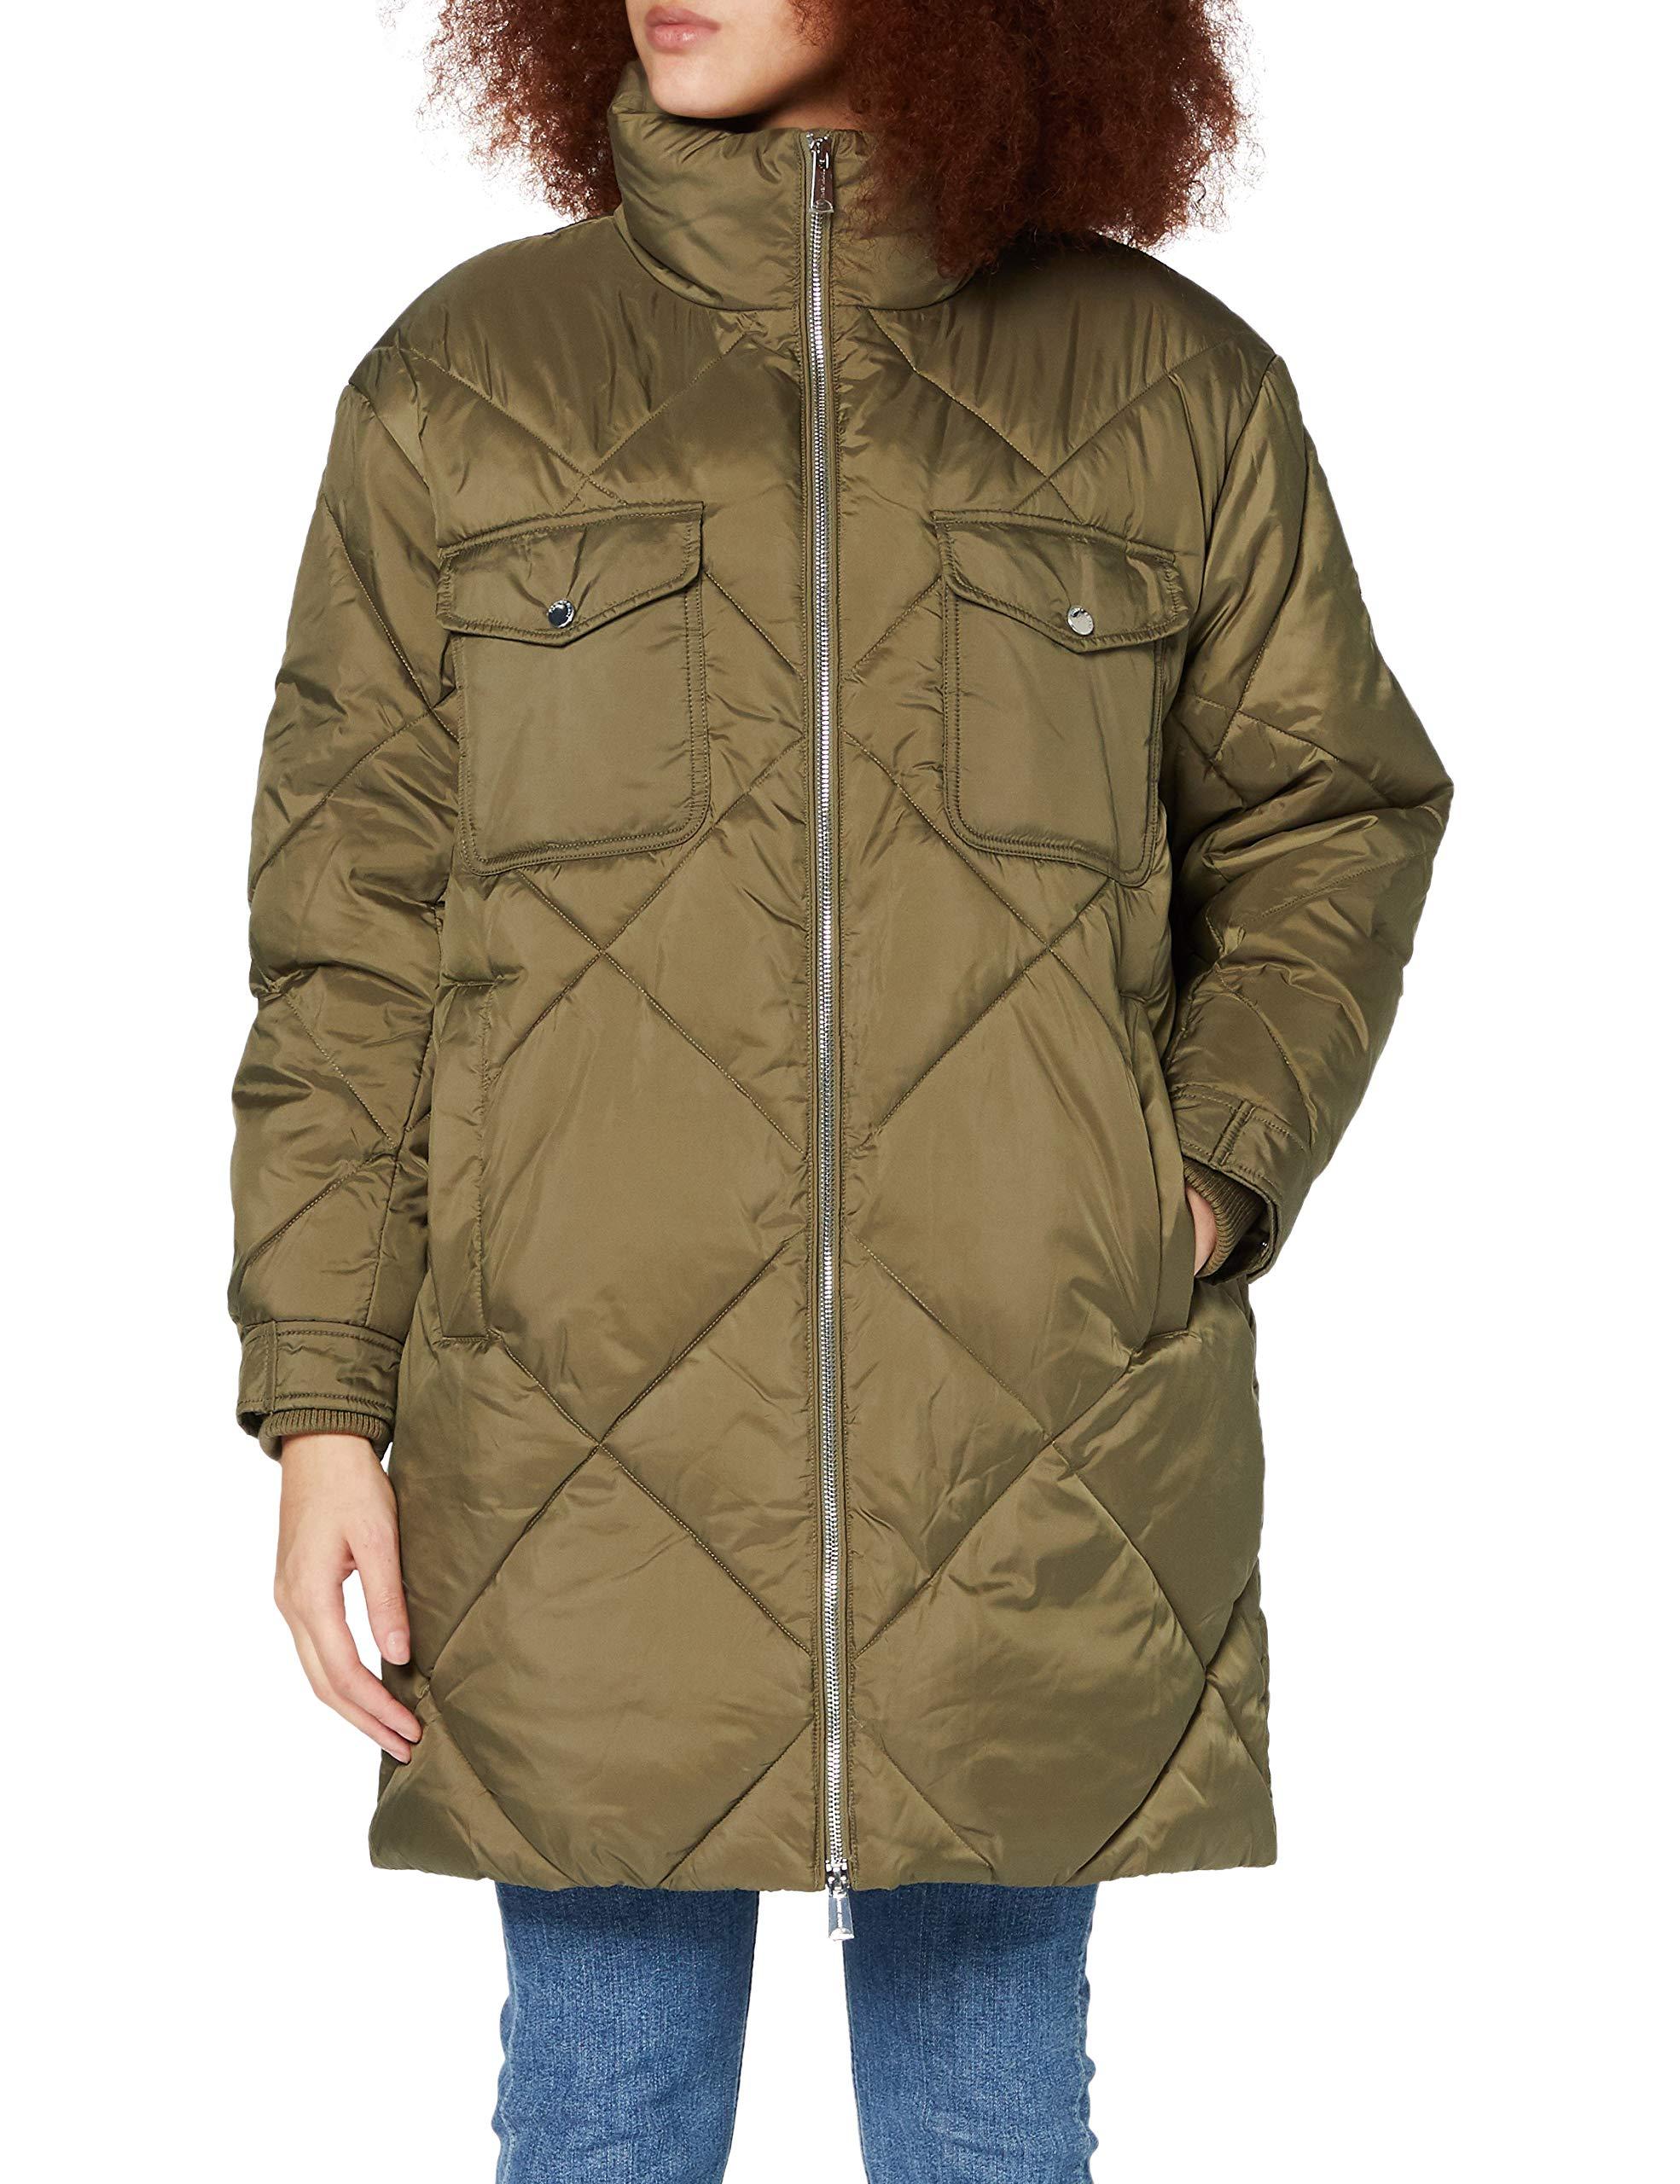 Tommy Hilfiger Denim Tjw Diamond Quilted Coat Jacket in Black (Green) -  Save 19% - Lyst